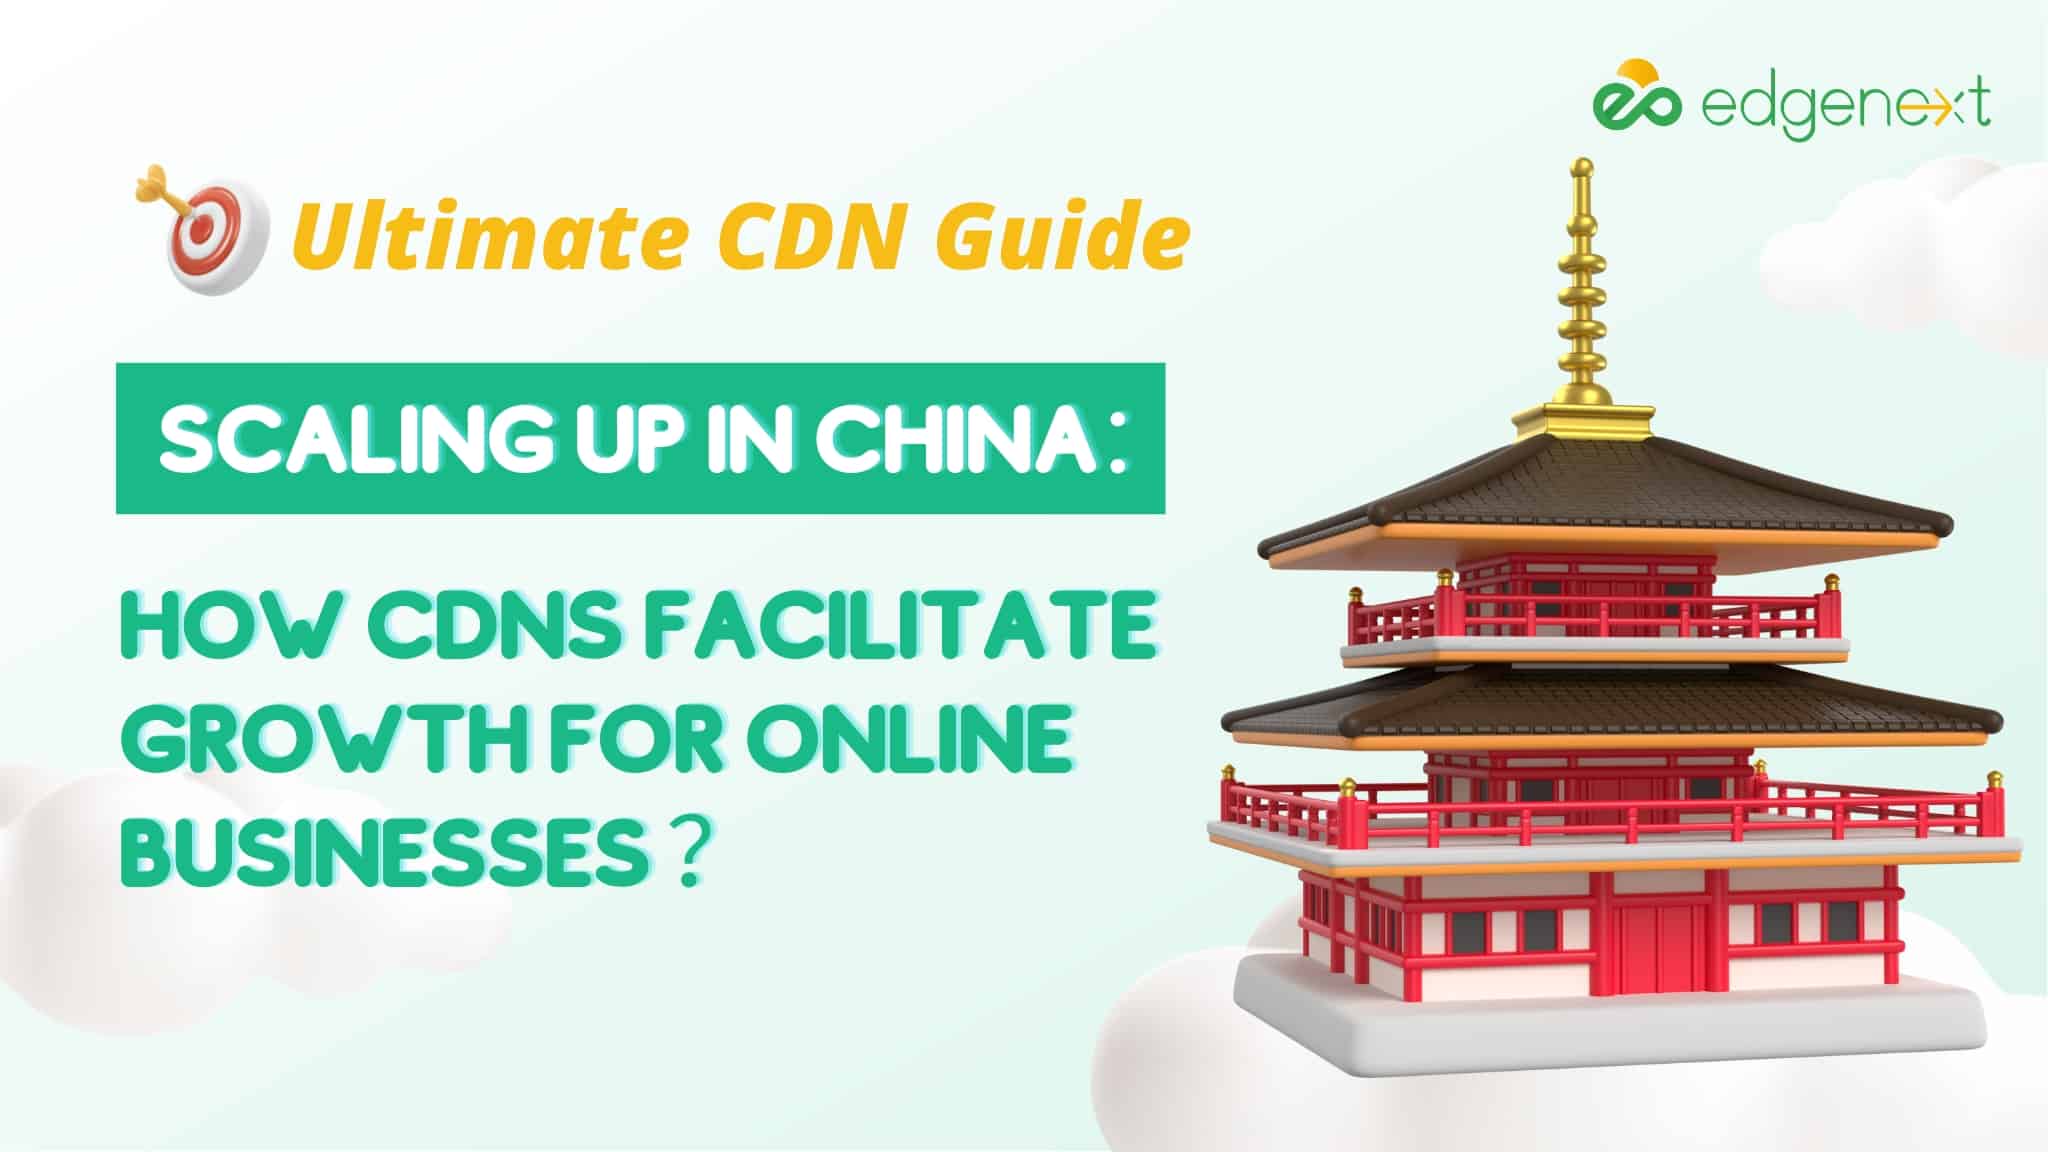 Scaling Up in China: How CDNs Facilitate Growth for Online Businesses